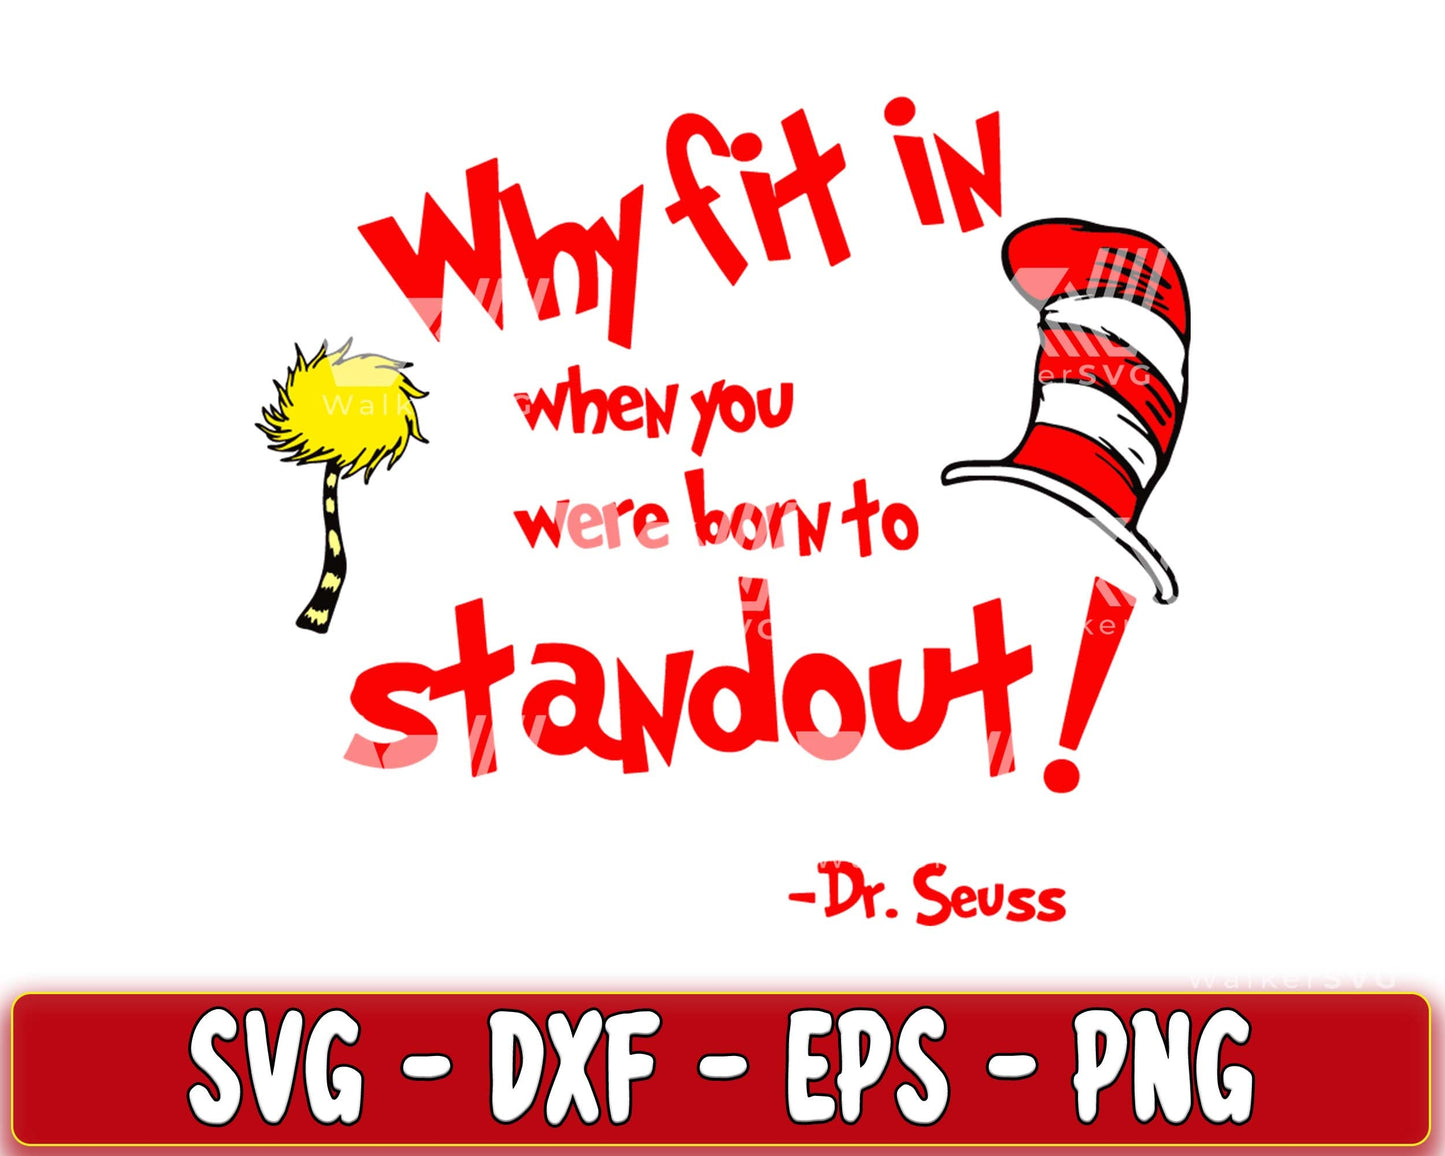 Why fit in when you were born to stand out dr seuss cat in the hat quo ...